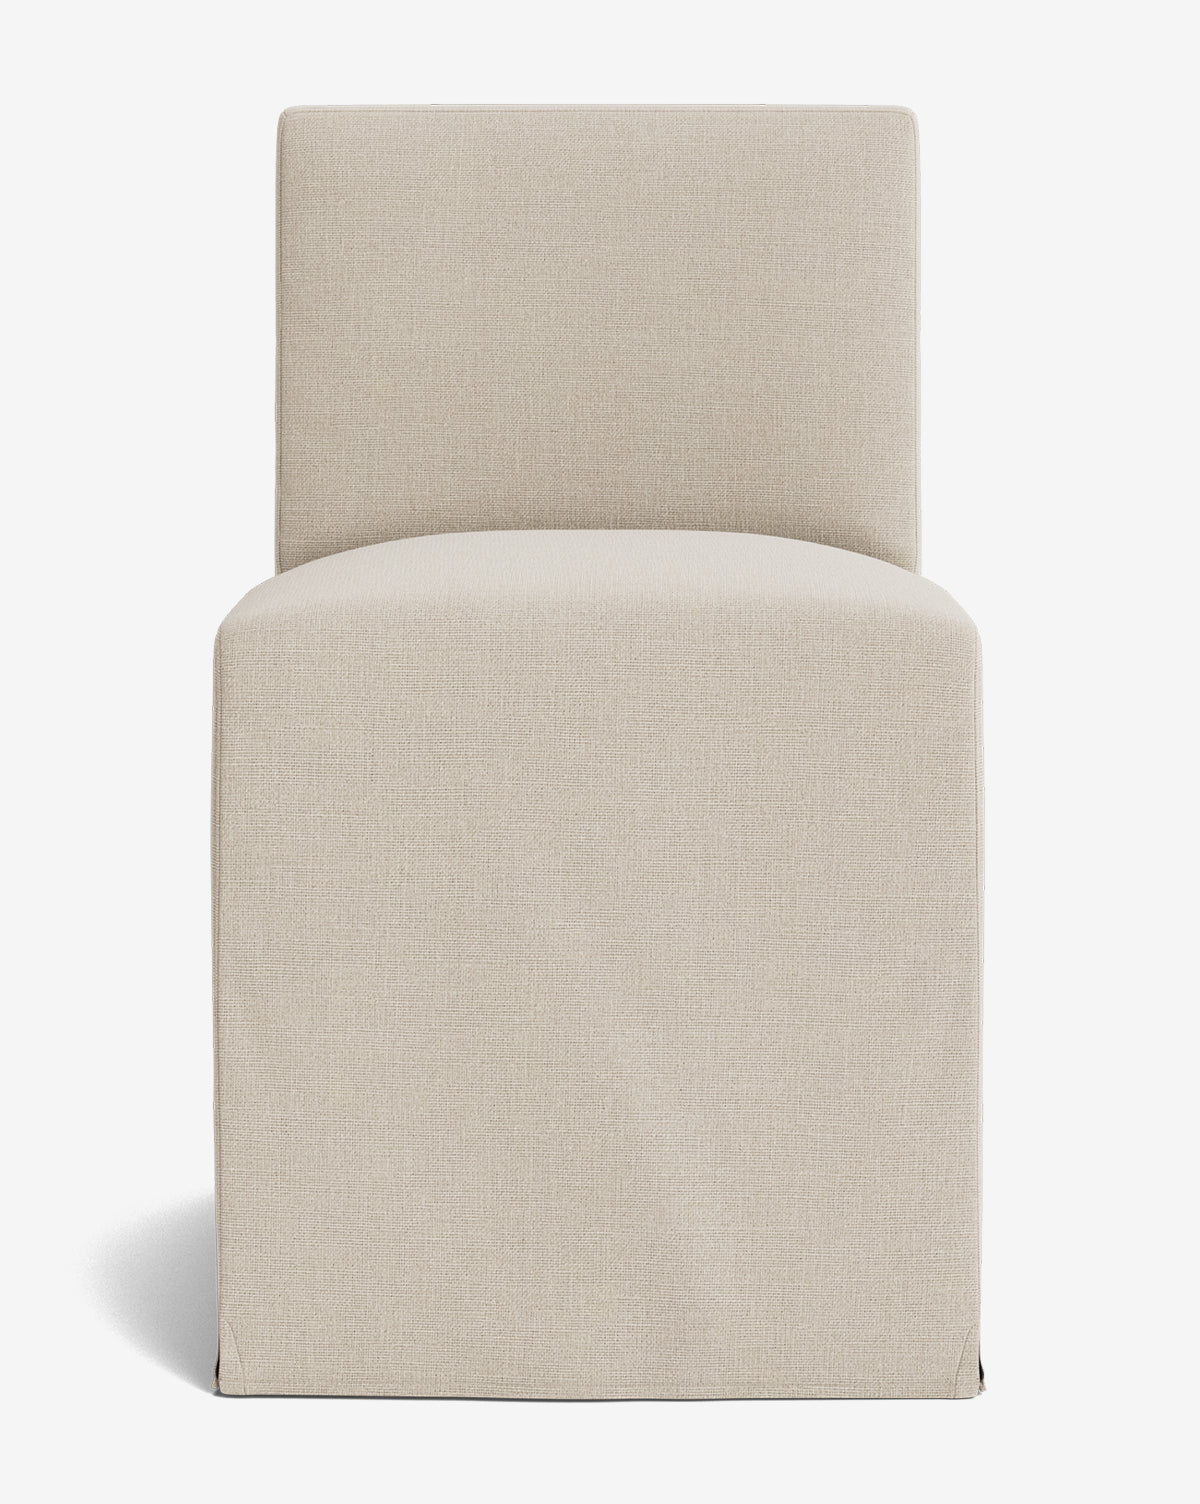 Rowe Fine Furniture, Olivier Slipcover Dining Chair